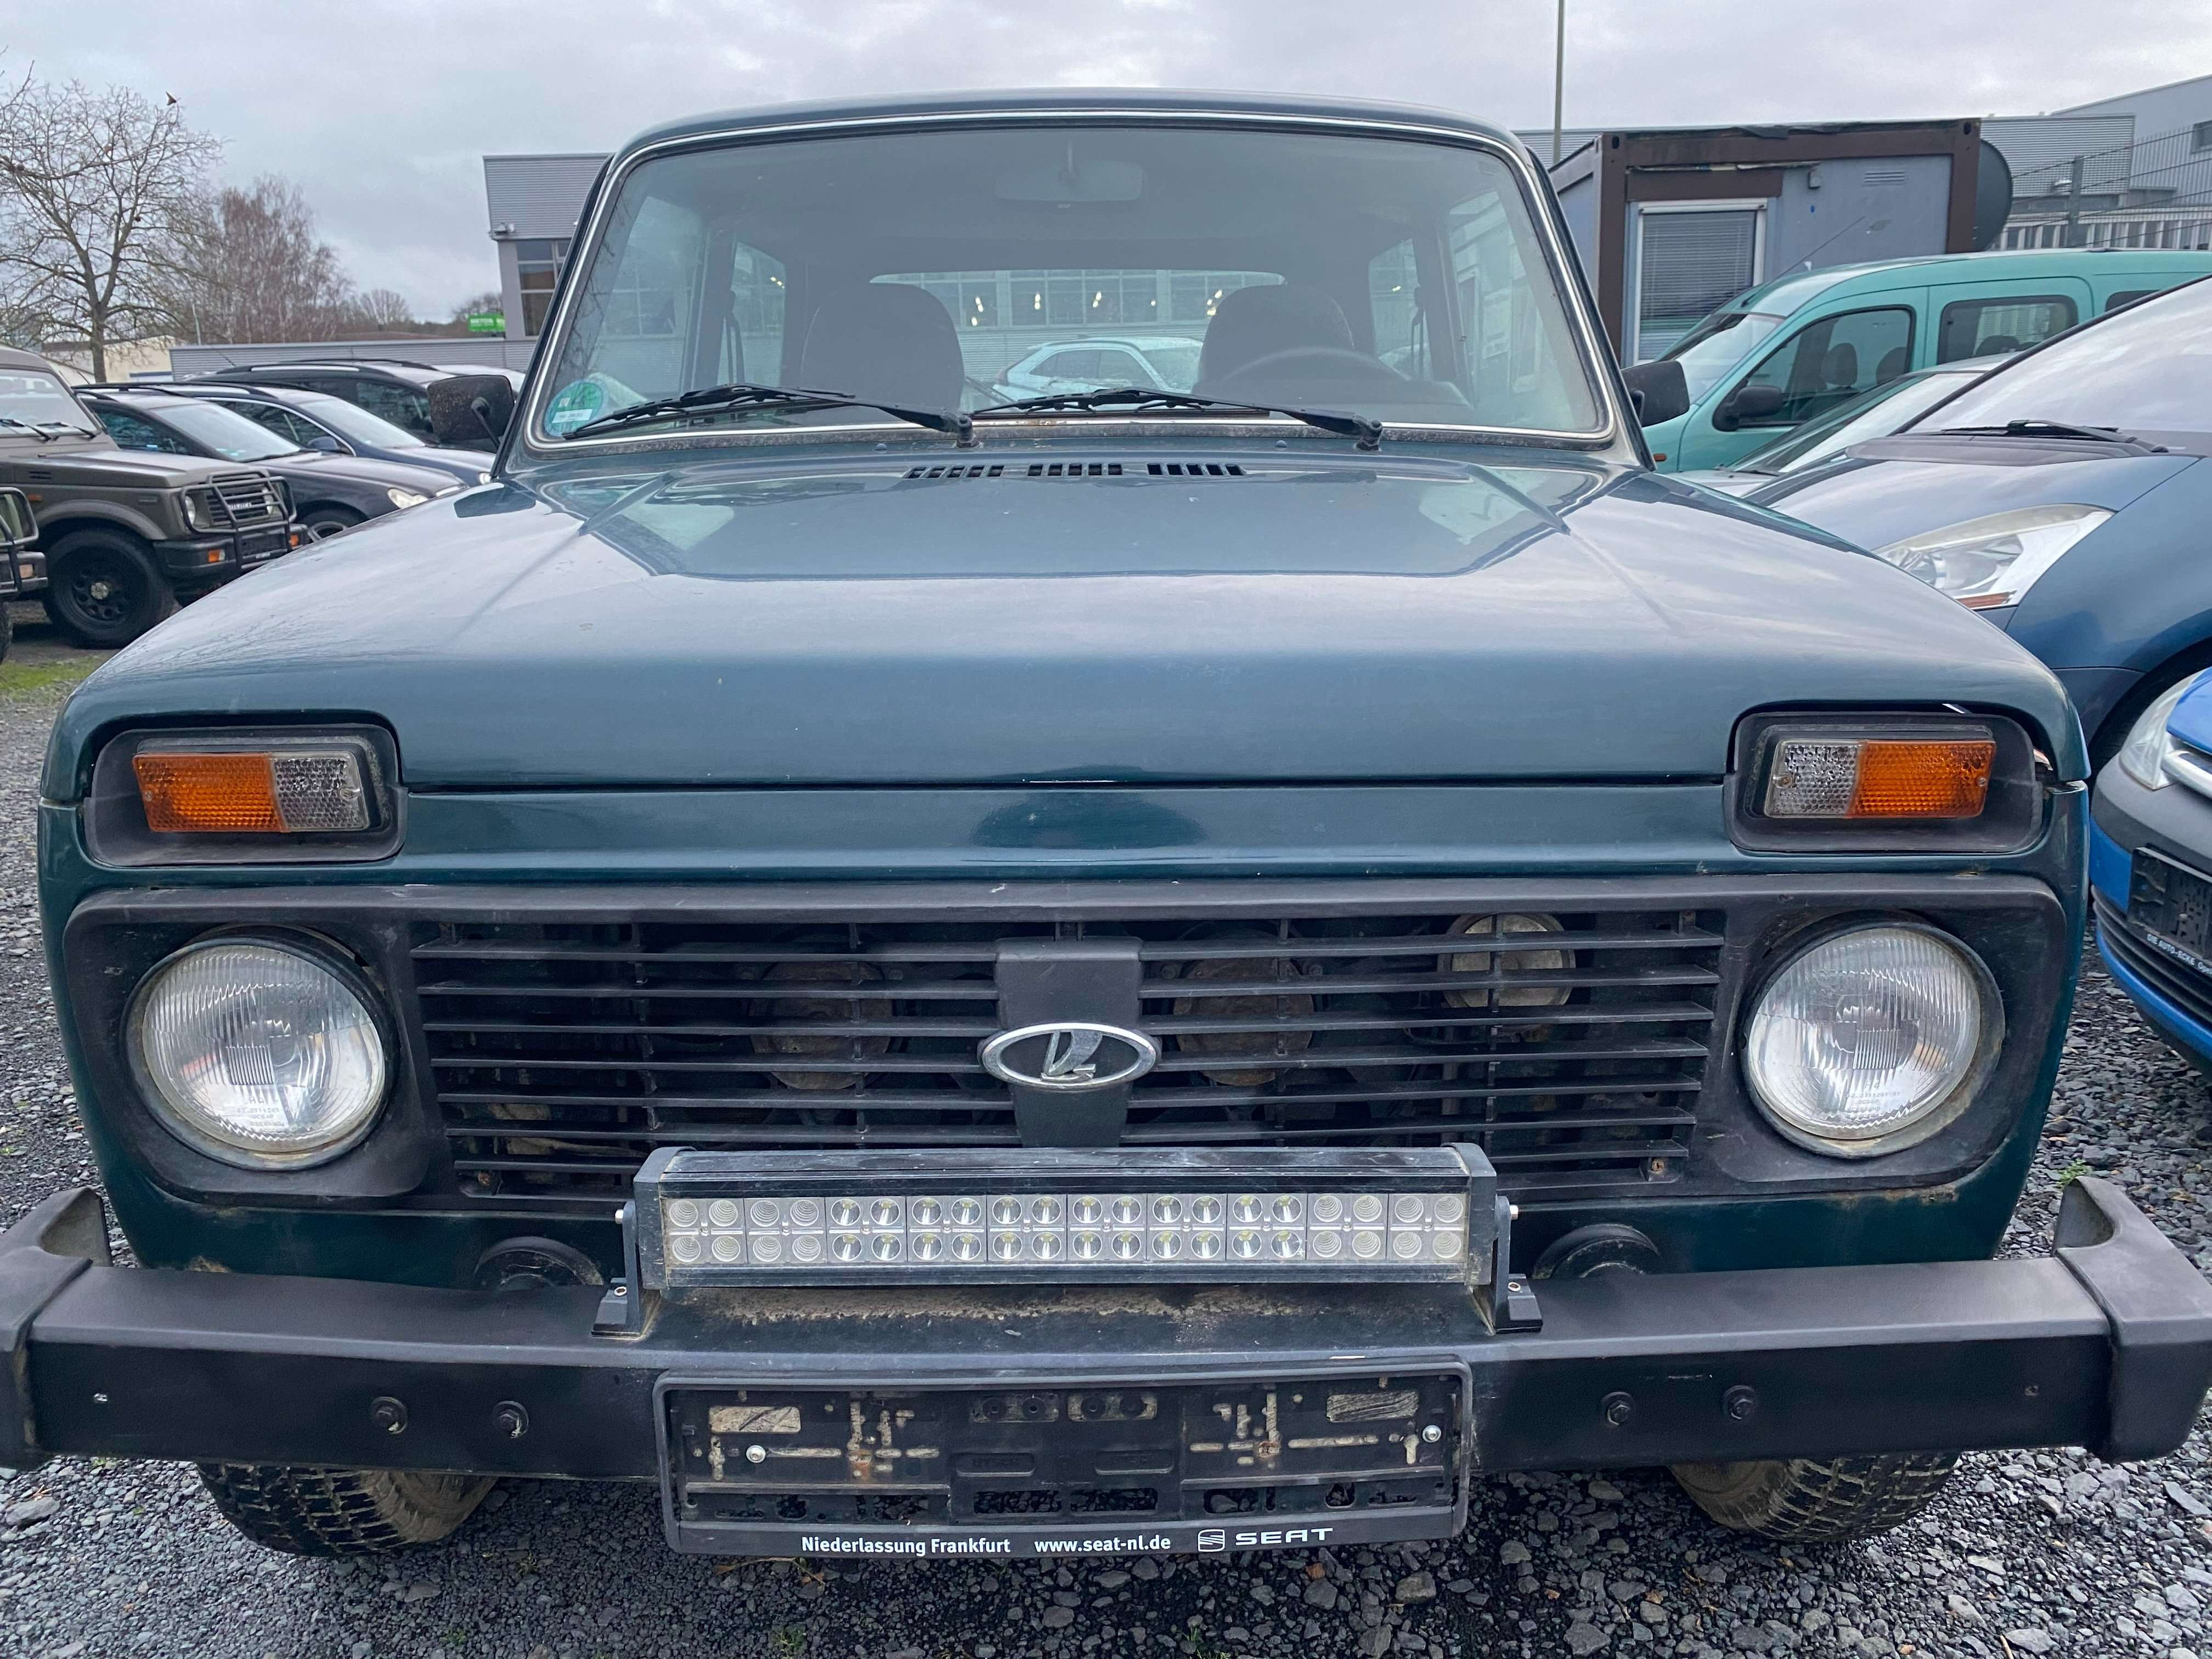 Lada Niva Off-Road/Pick-up in Green used in Gelnhausen for € 1,999.-